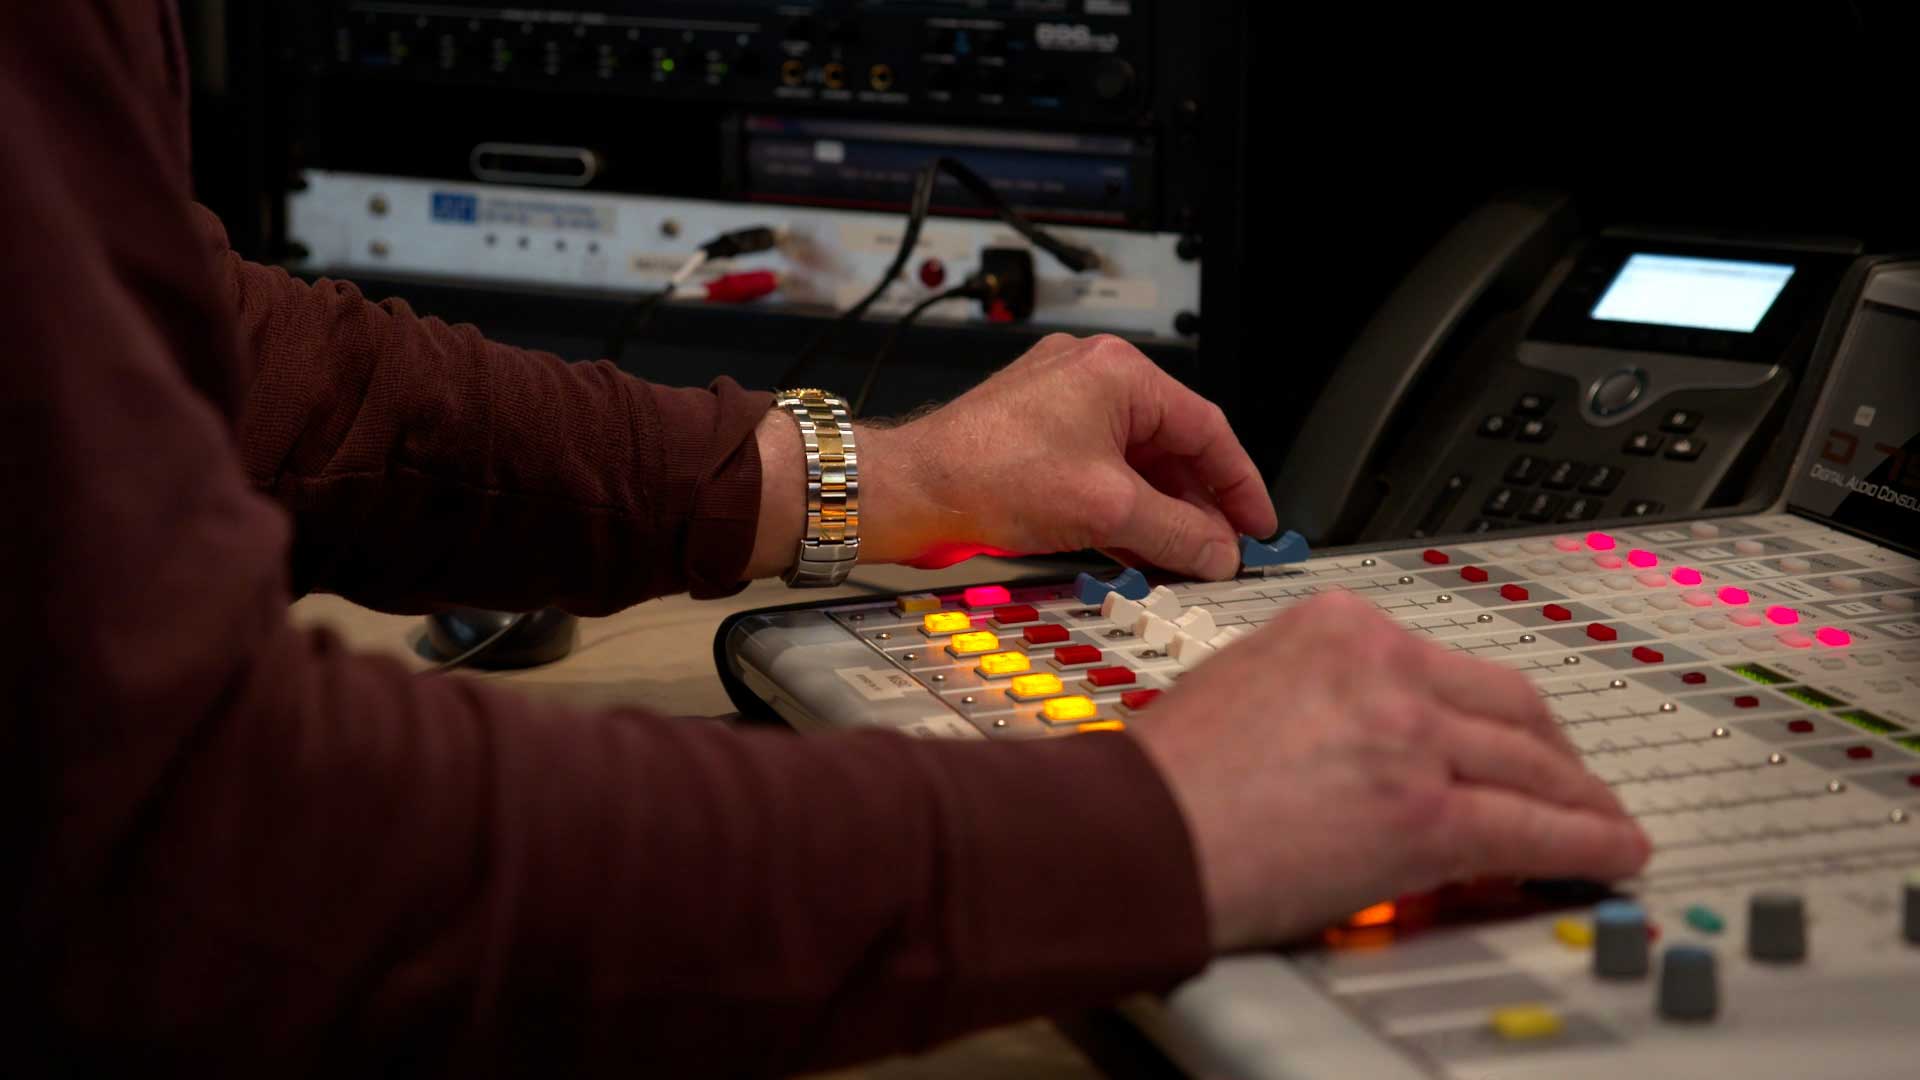 persons hands operating a switcher